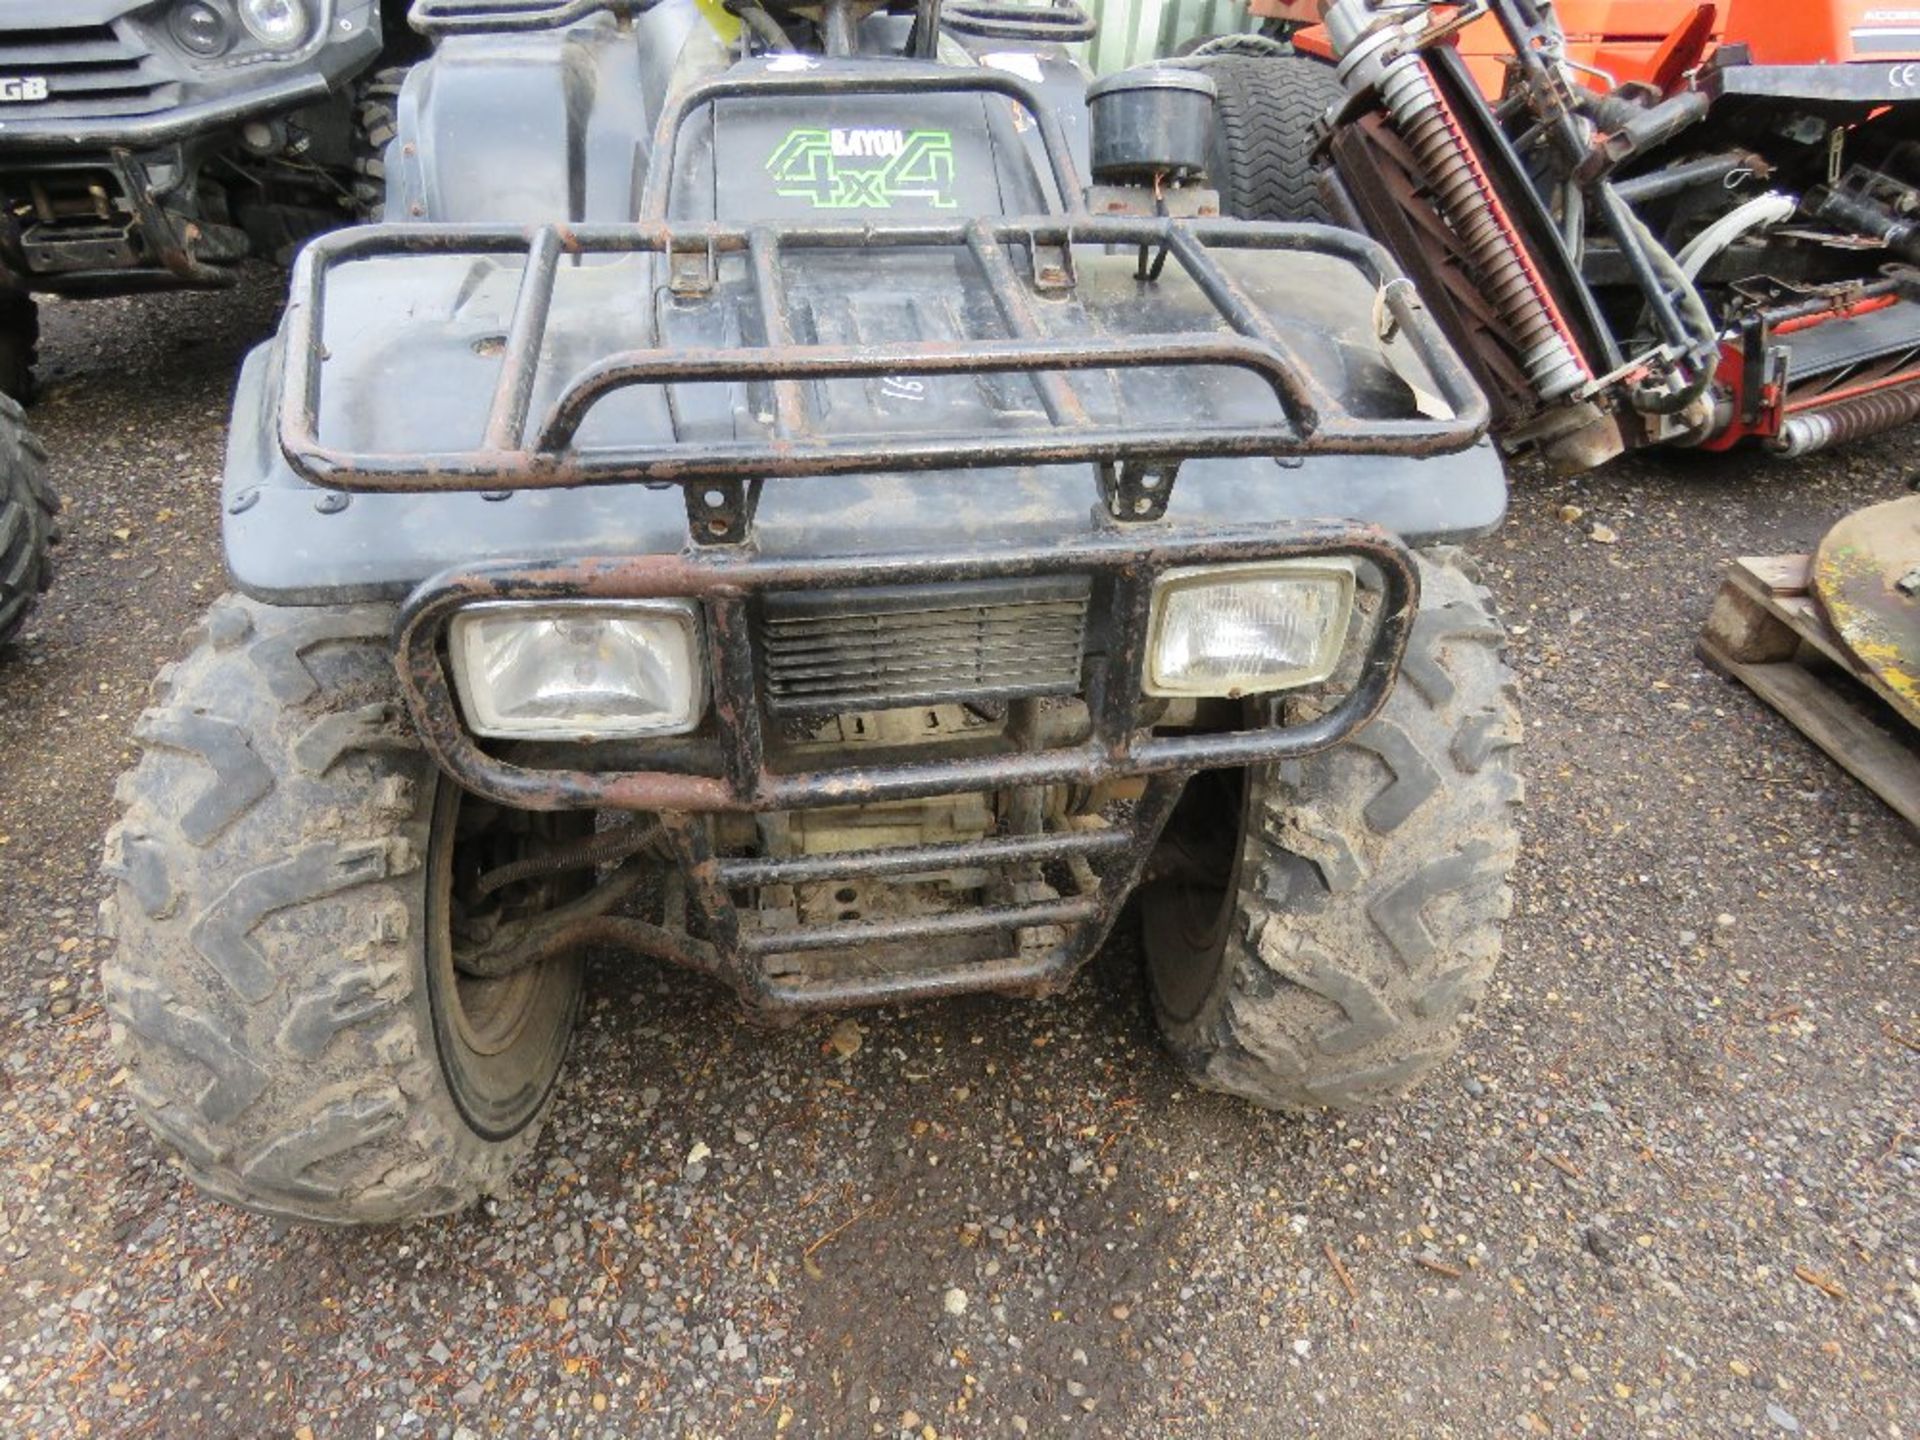 KAWASAKI BAYOU 4WD QUAD BIKE 5174REC MILES, . WHEN TESTED WAS SEEN TO DRIVE, STEER AND BRAKE, STA - Image 2 of 6